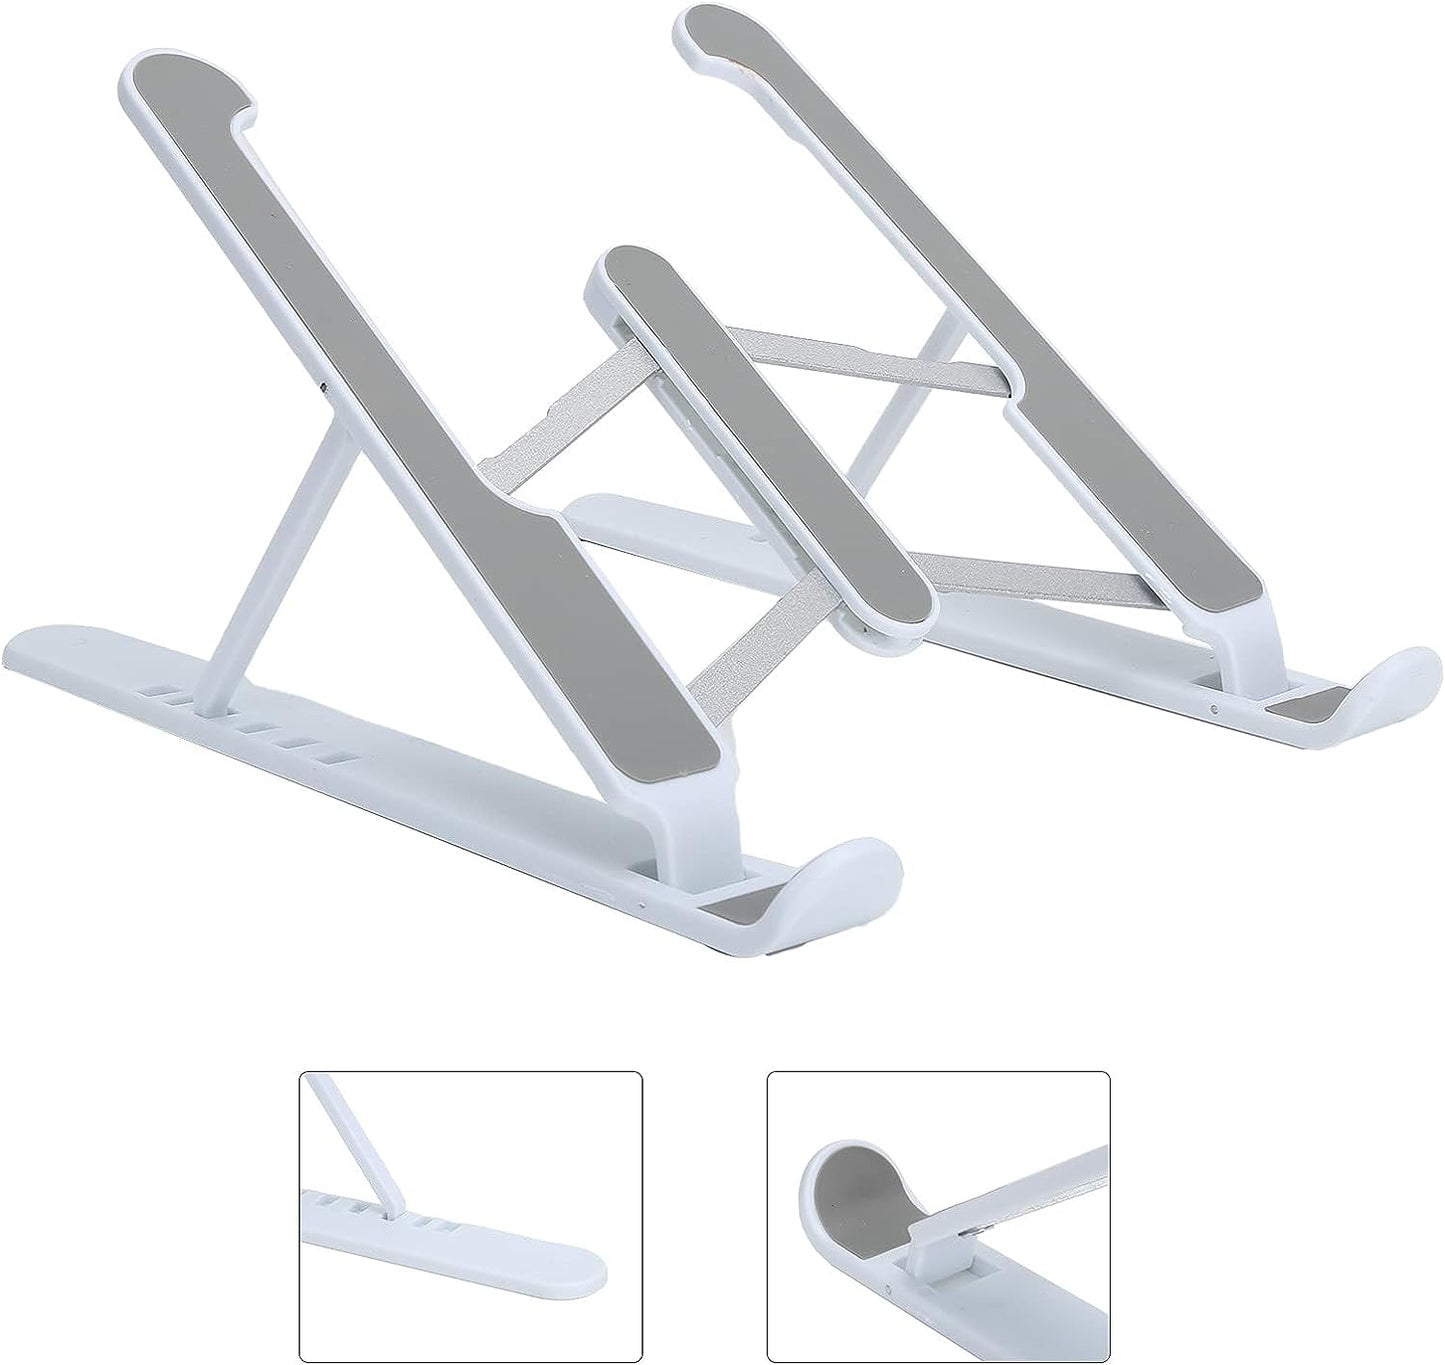 ADJUSTABLE TABLET STAND HOLDER WITH BUILT-IN FOLDABLE LEGS AND HIGH QUALITY FIBRE